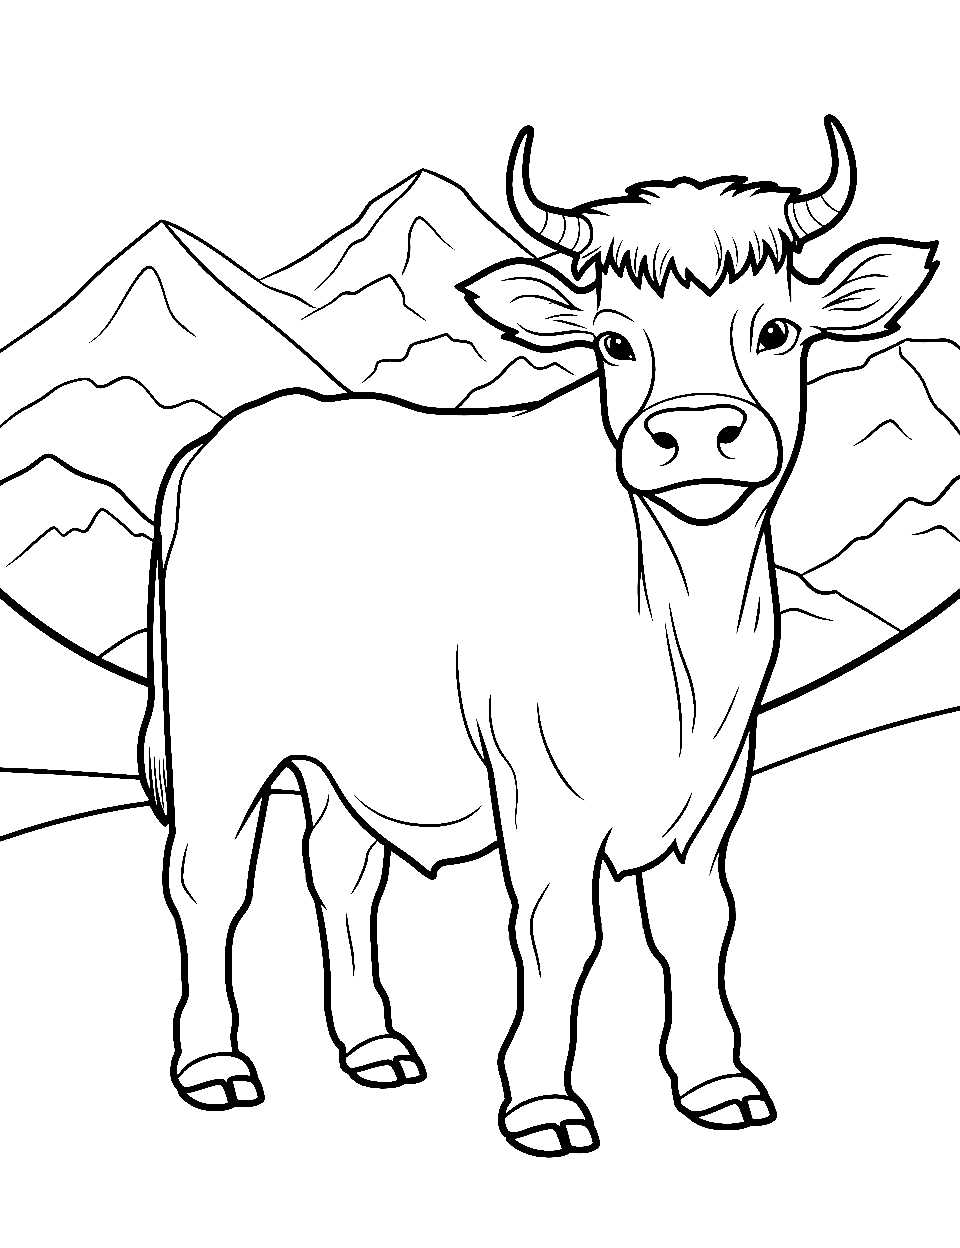 Moo in the Mountains Coloring Page - A cow, standing confidently in front of simplistic, rolling mountains.